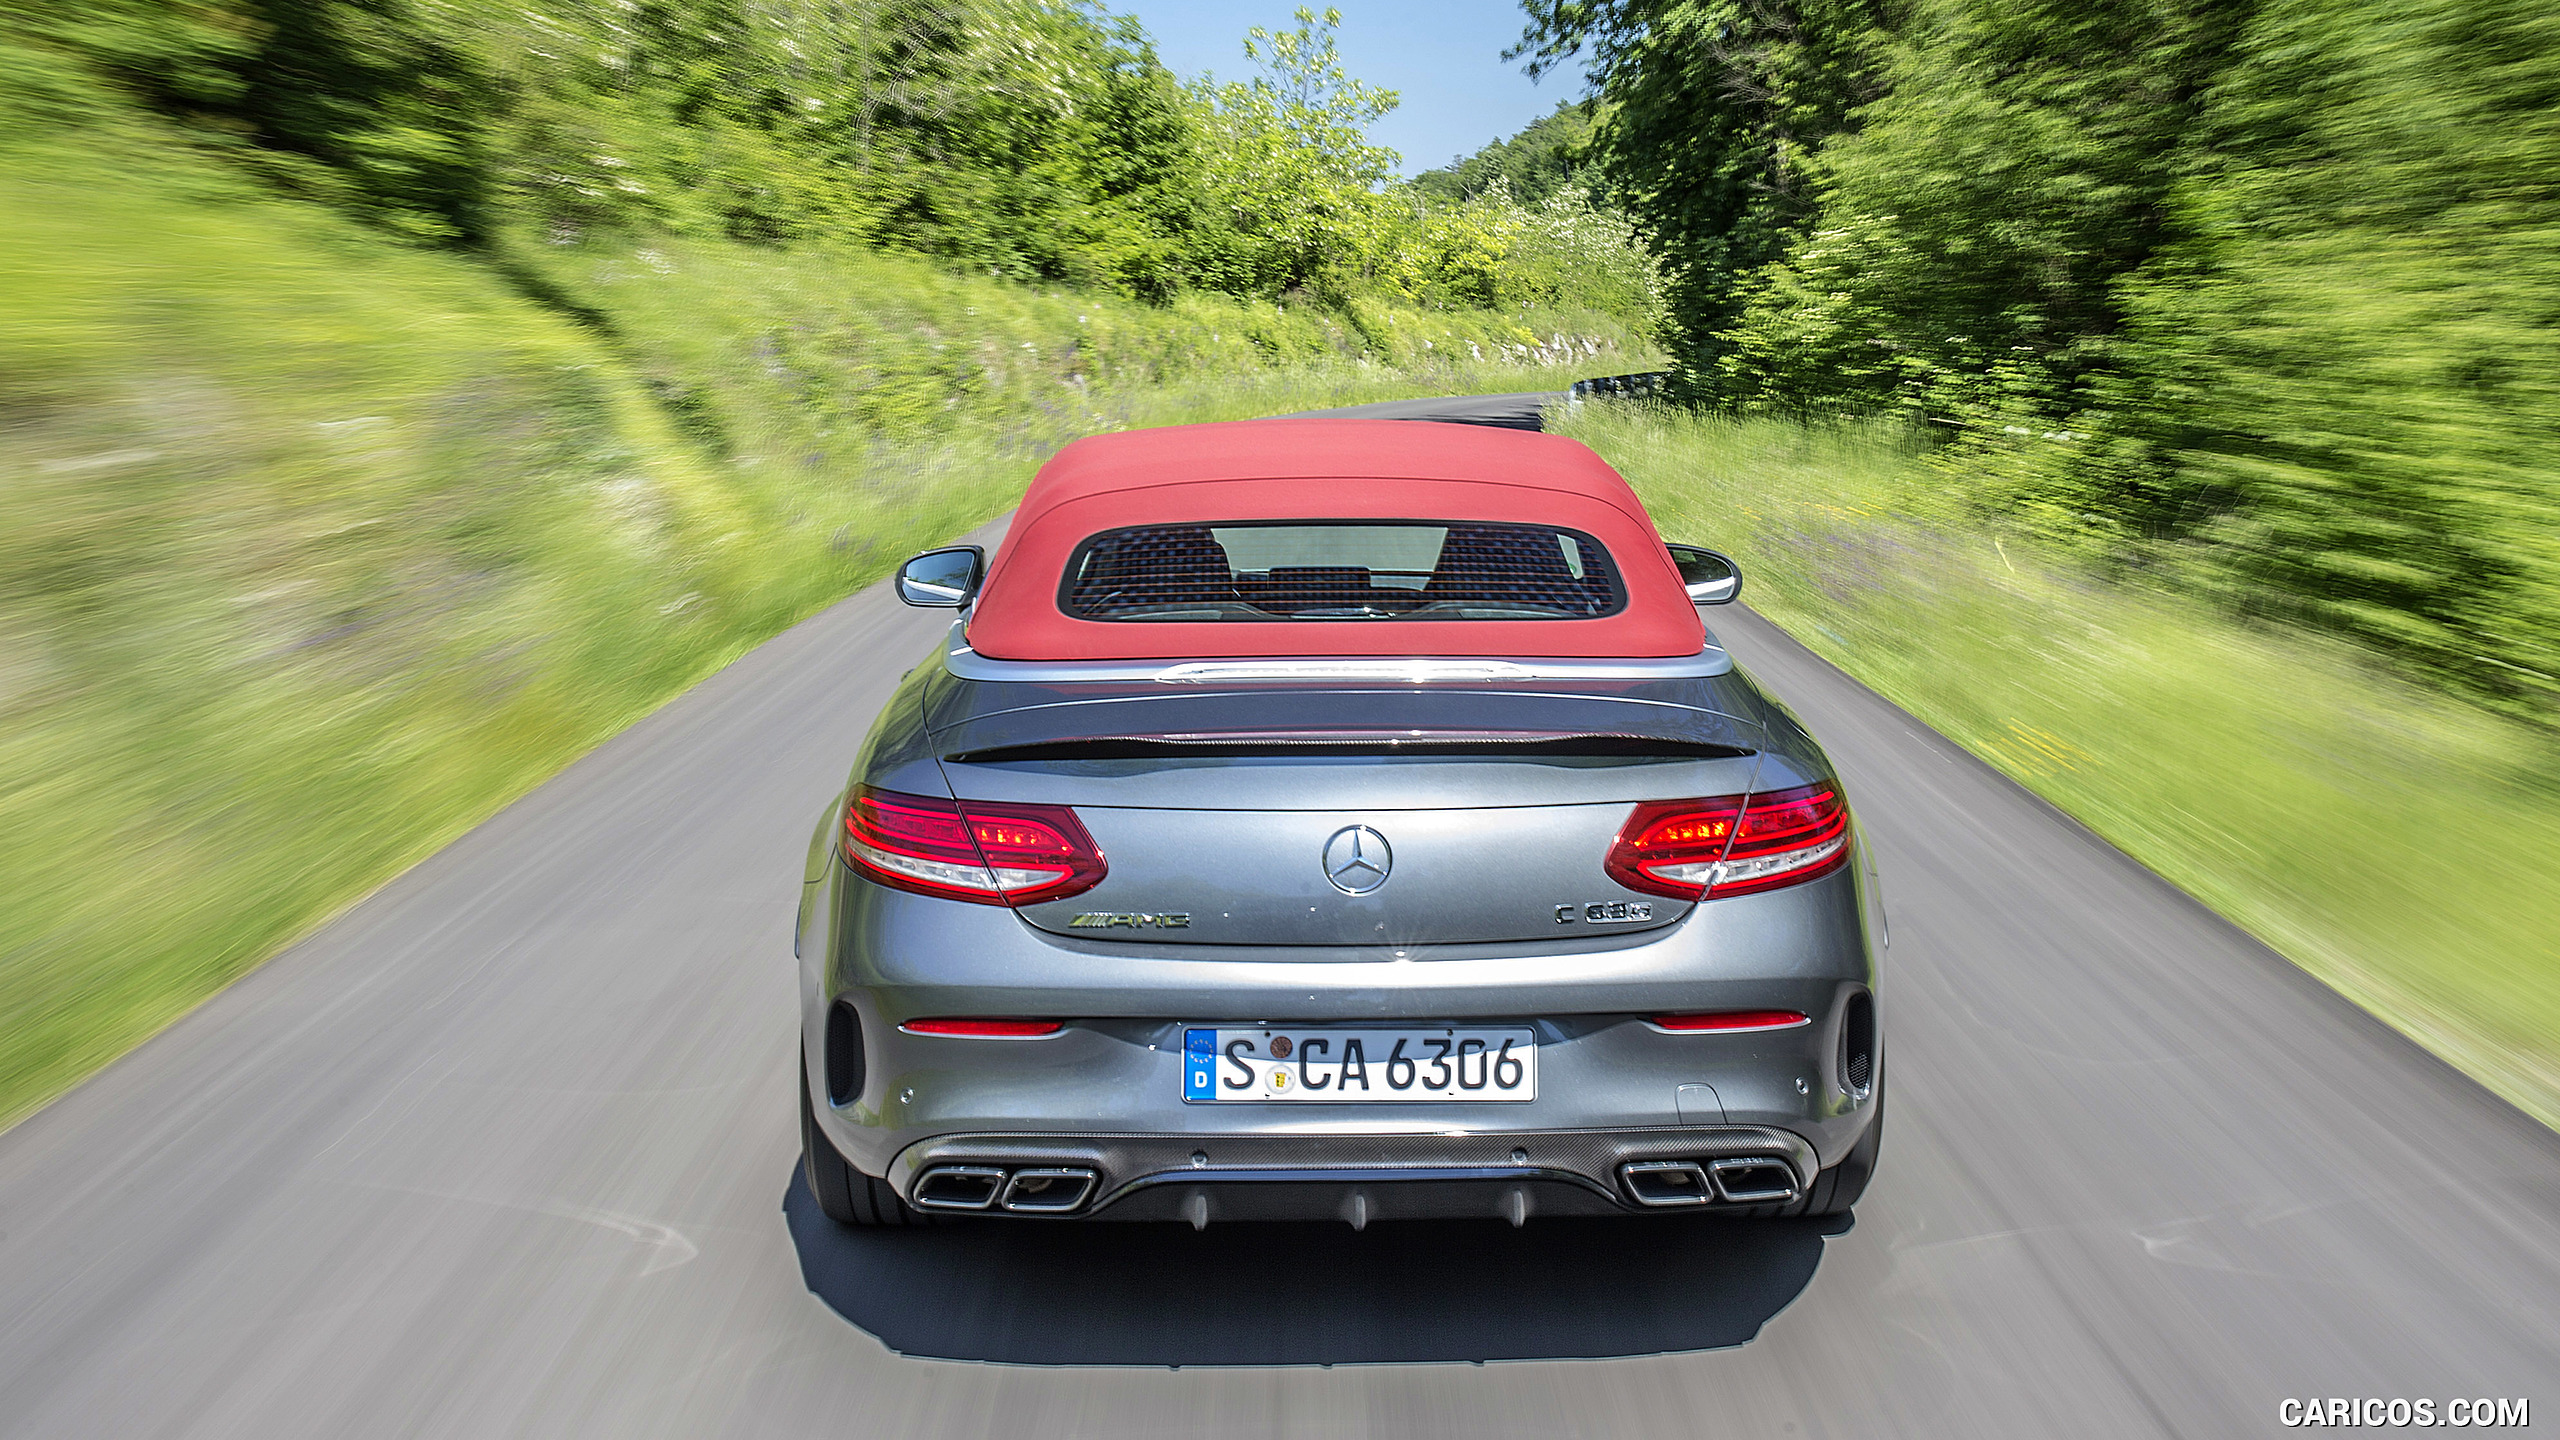 2017 Mercedes-AMG C63 S Cabriolet - Rear, #27 of 222